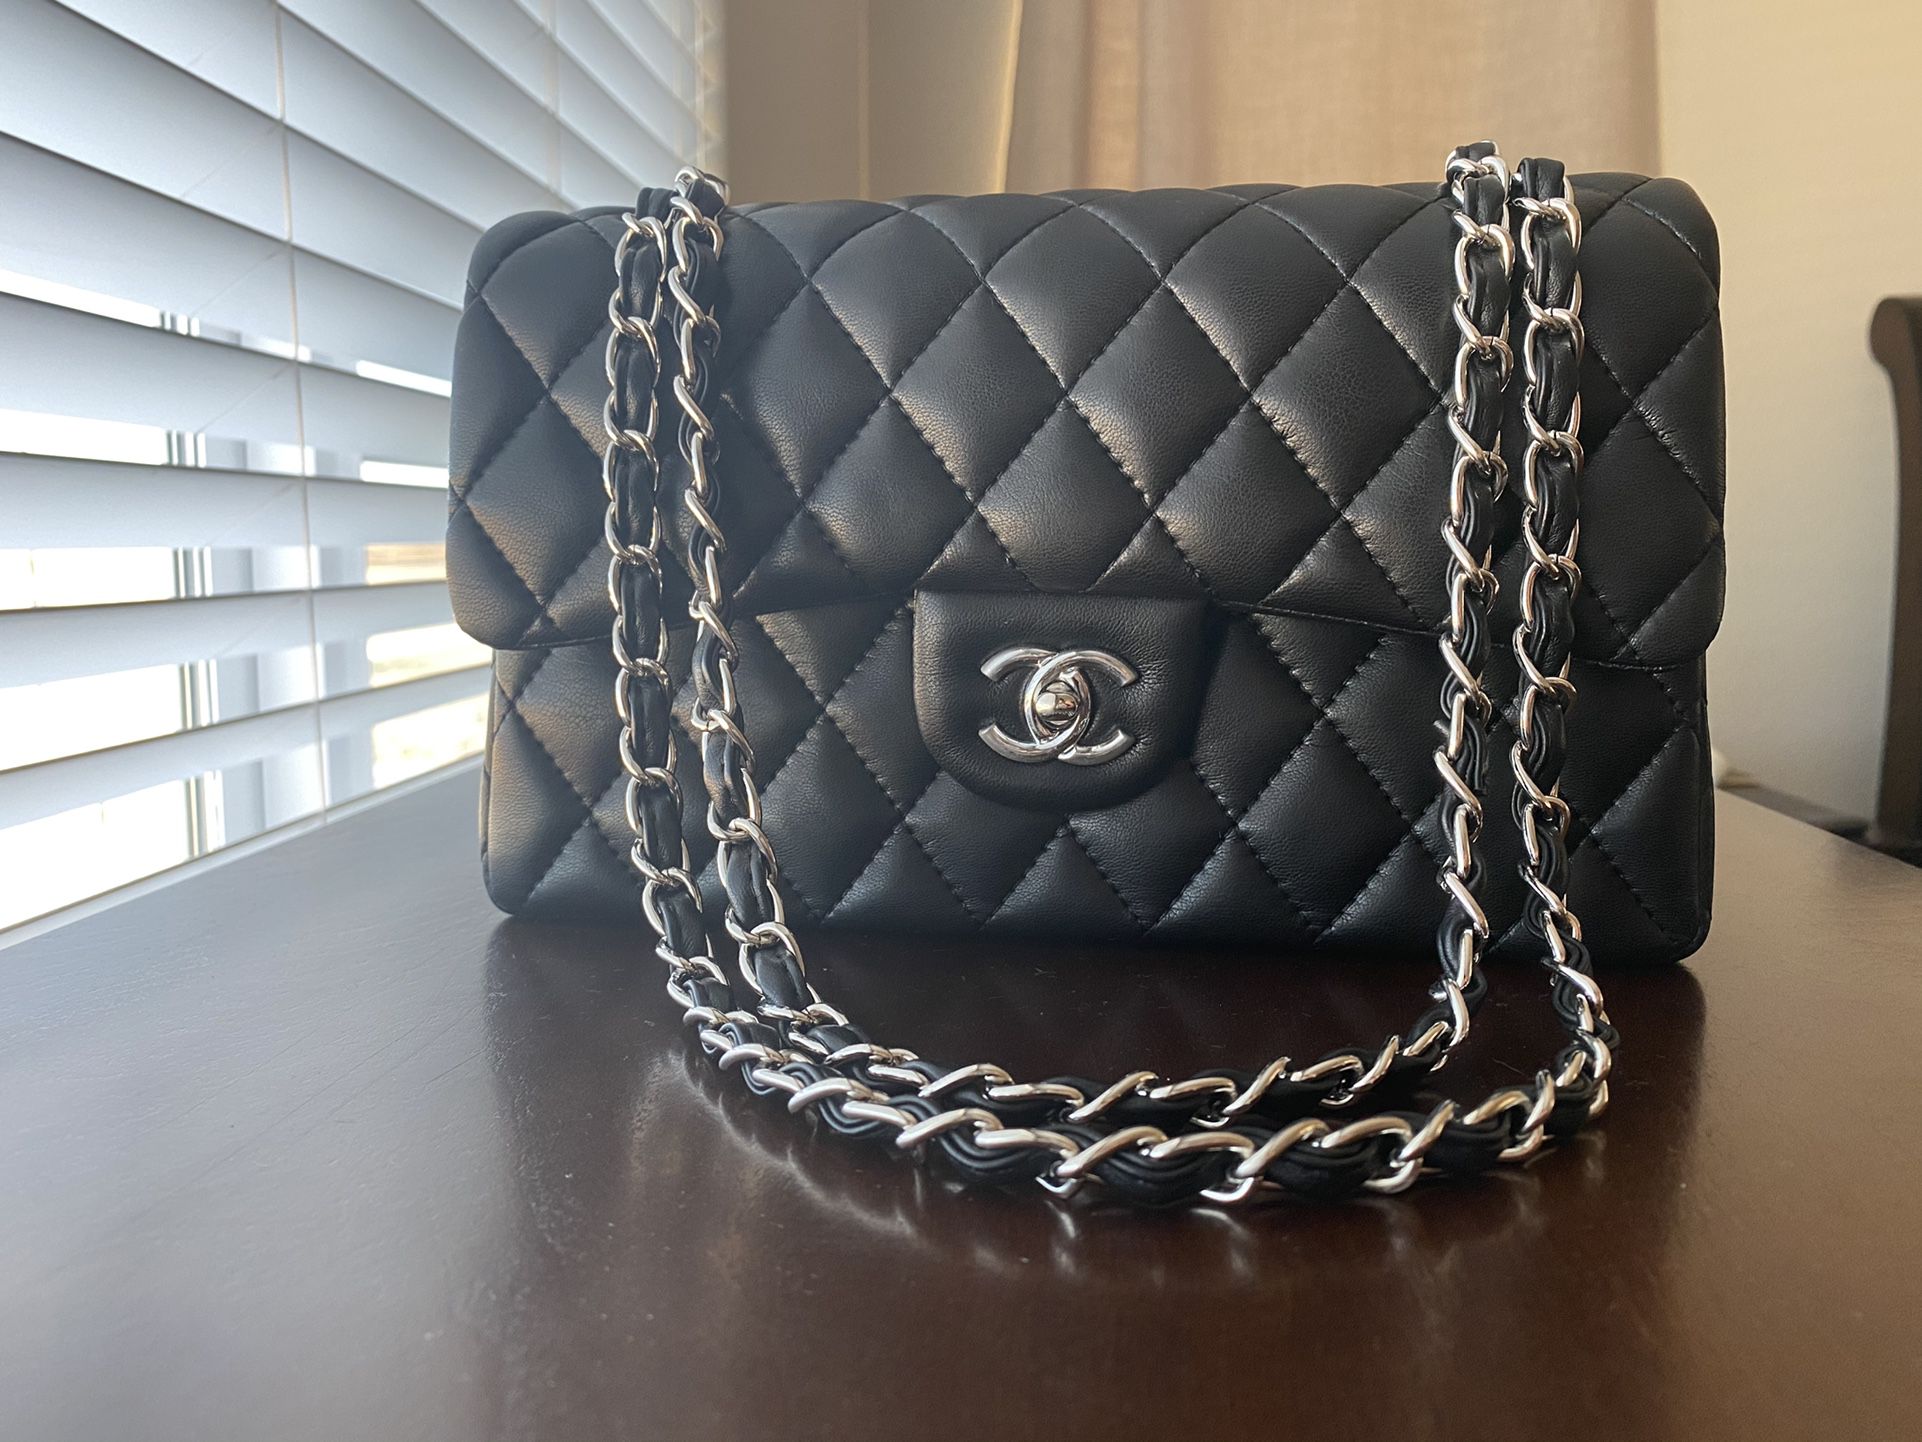 Black Purse With Silver Hardware